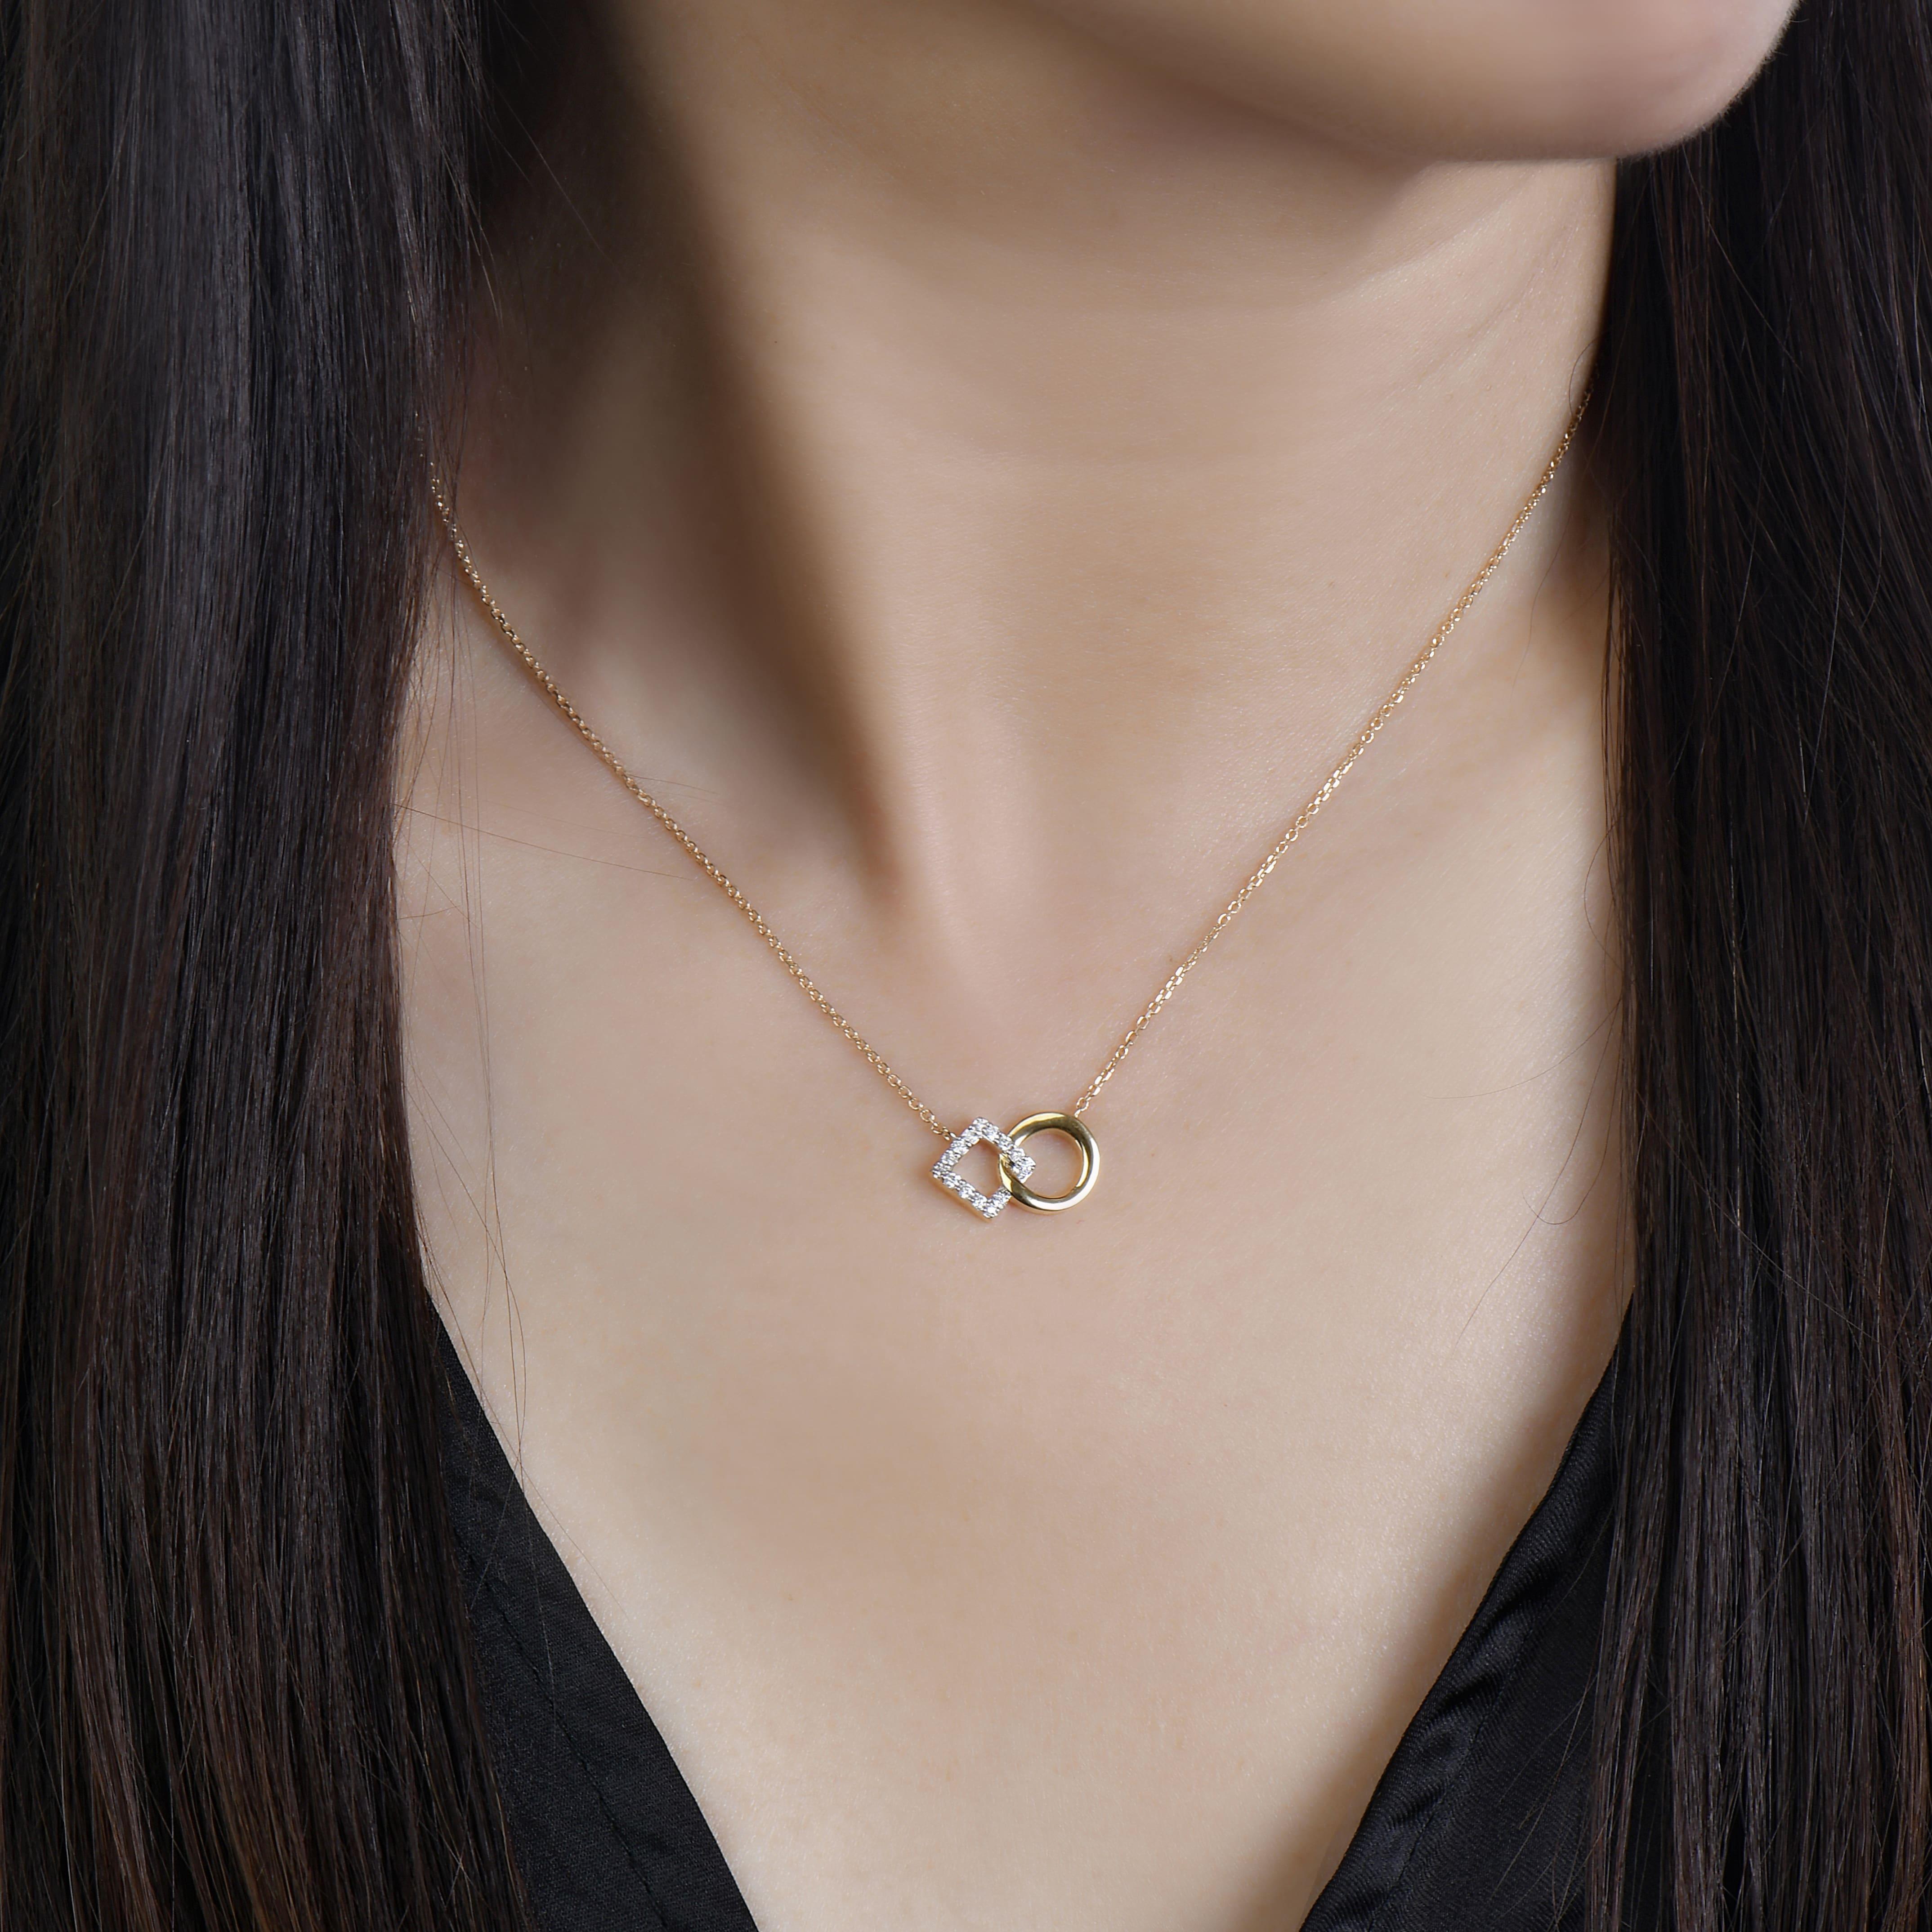 This geometric diamond necklace embodies femininity. A classy and chic design, the 14k gold necklace embodies the connection between two people. This romantic piece is the perfect layering necklace yet it's chic enough to wear as a standout. 

14K